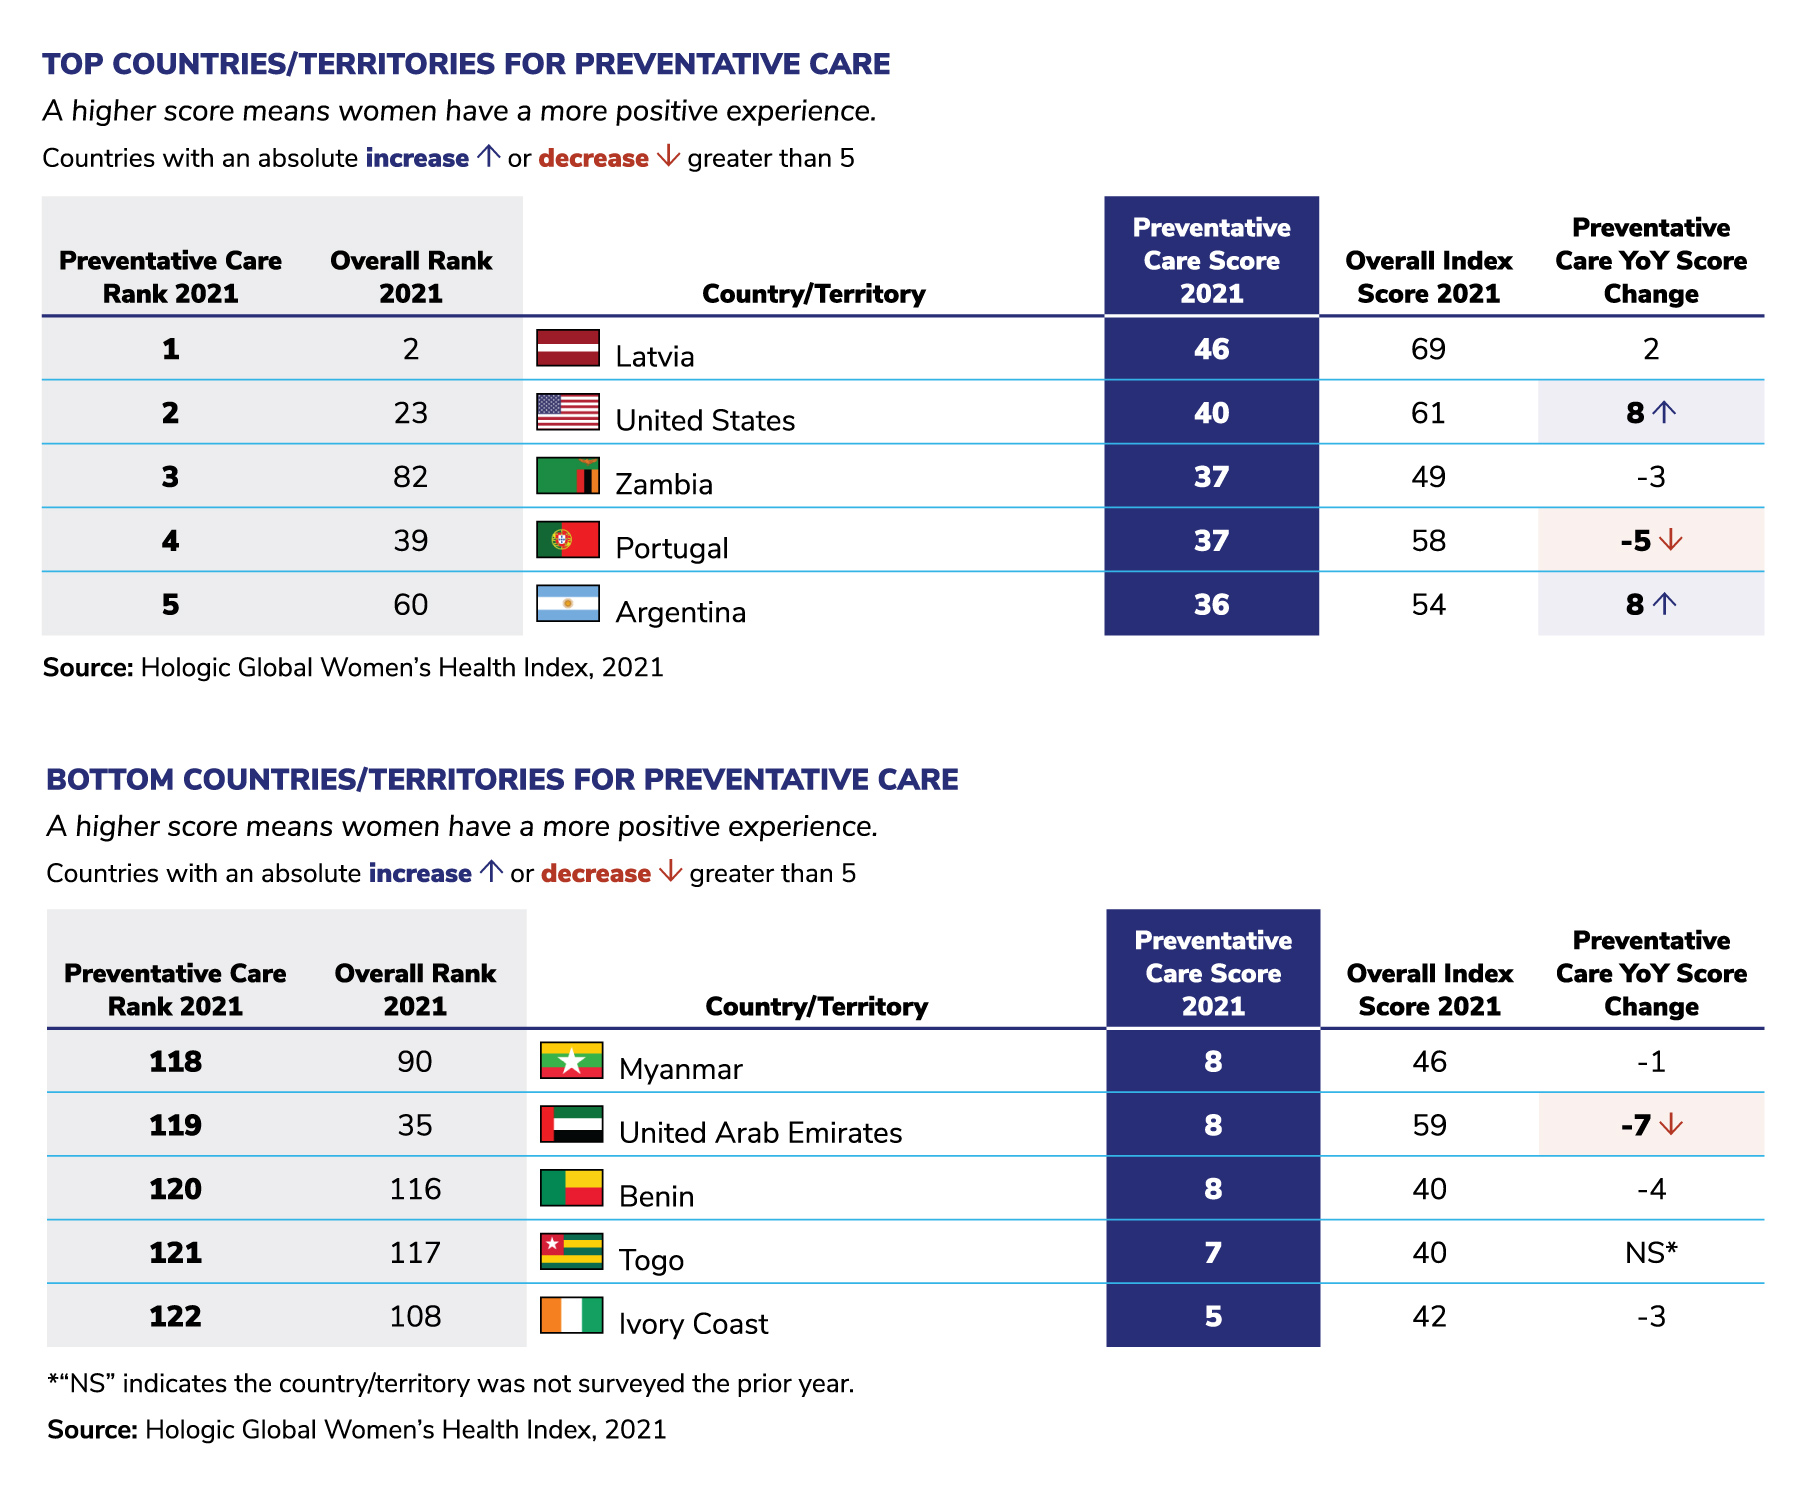 Table 1.1: Country Rankings for Preventive Care for Women